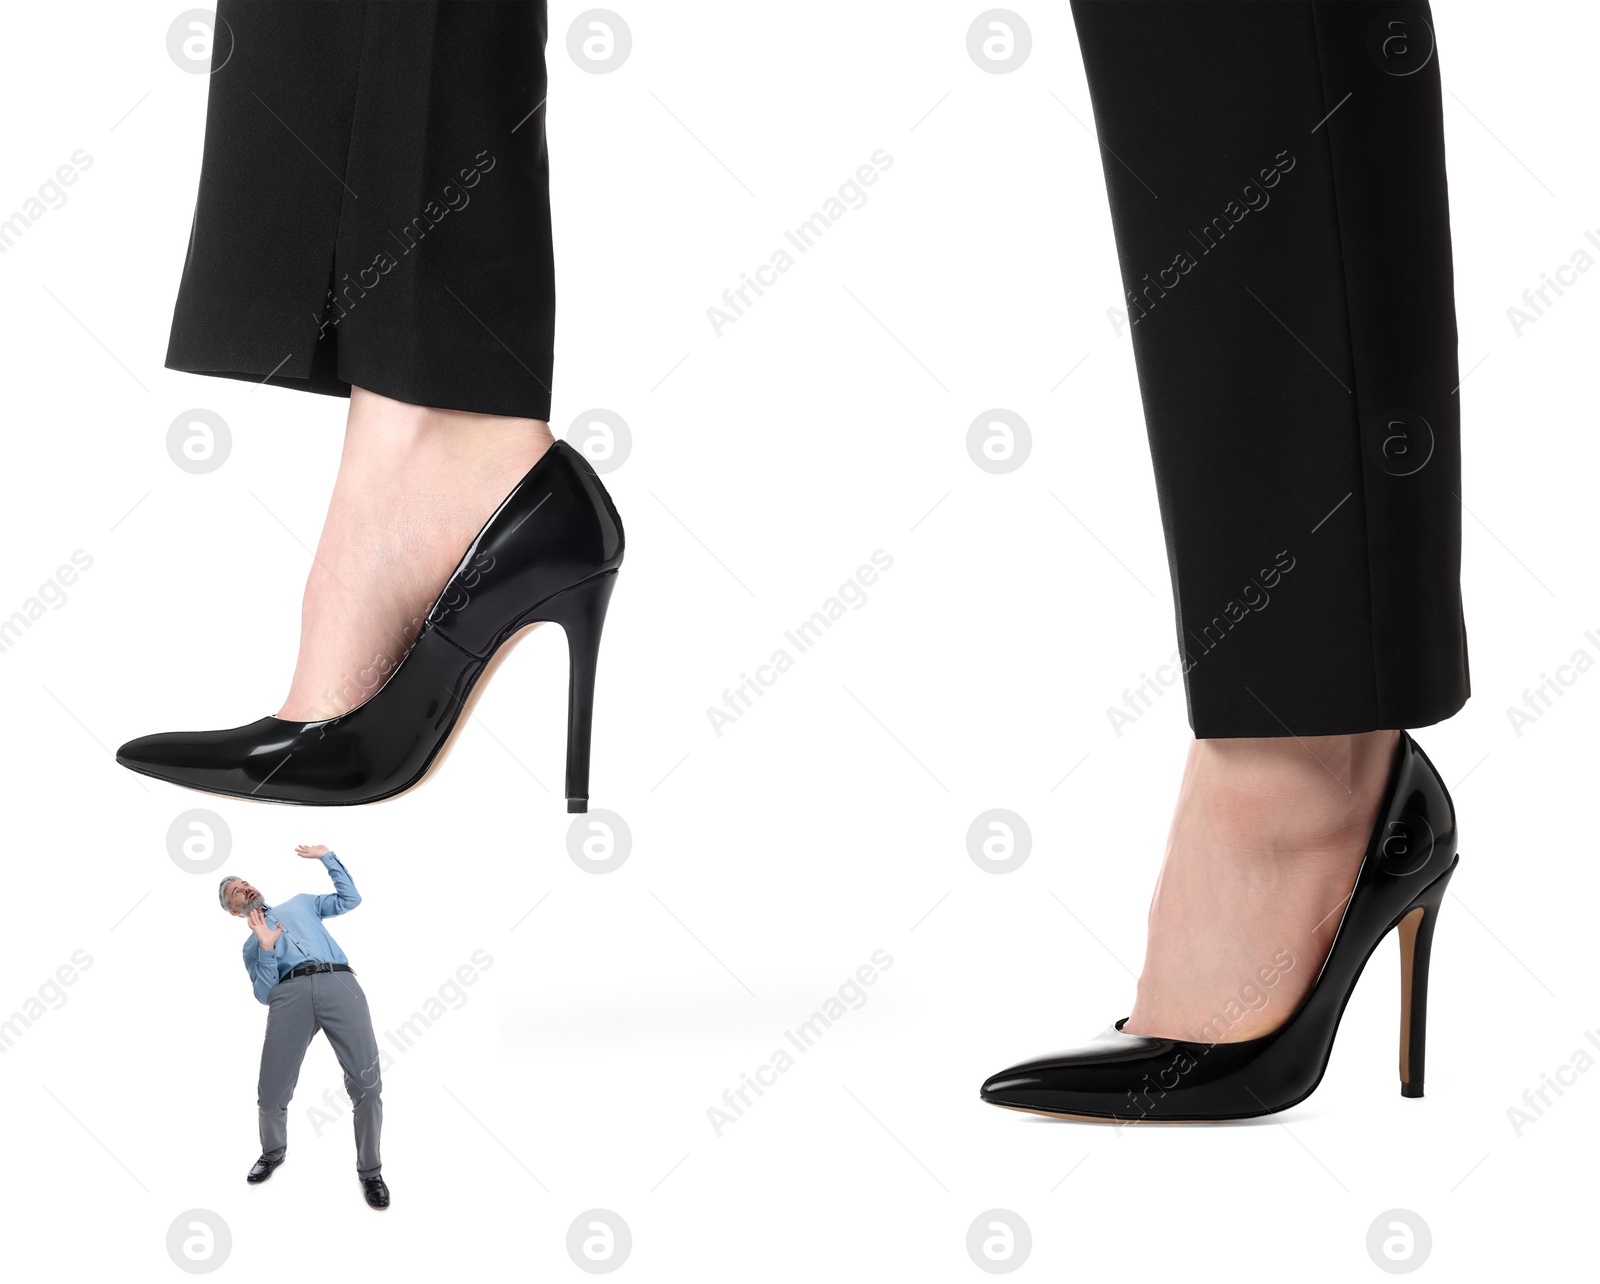 Image of Big woman stepping onto small man on white background